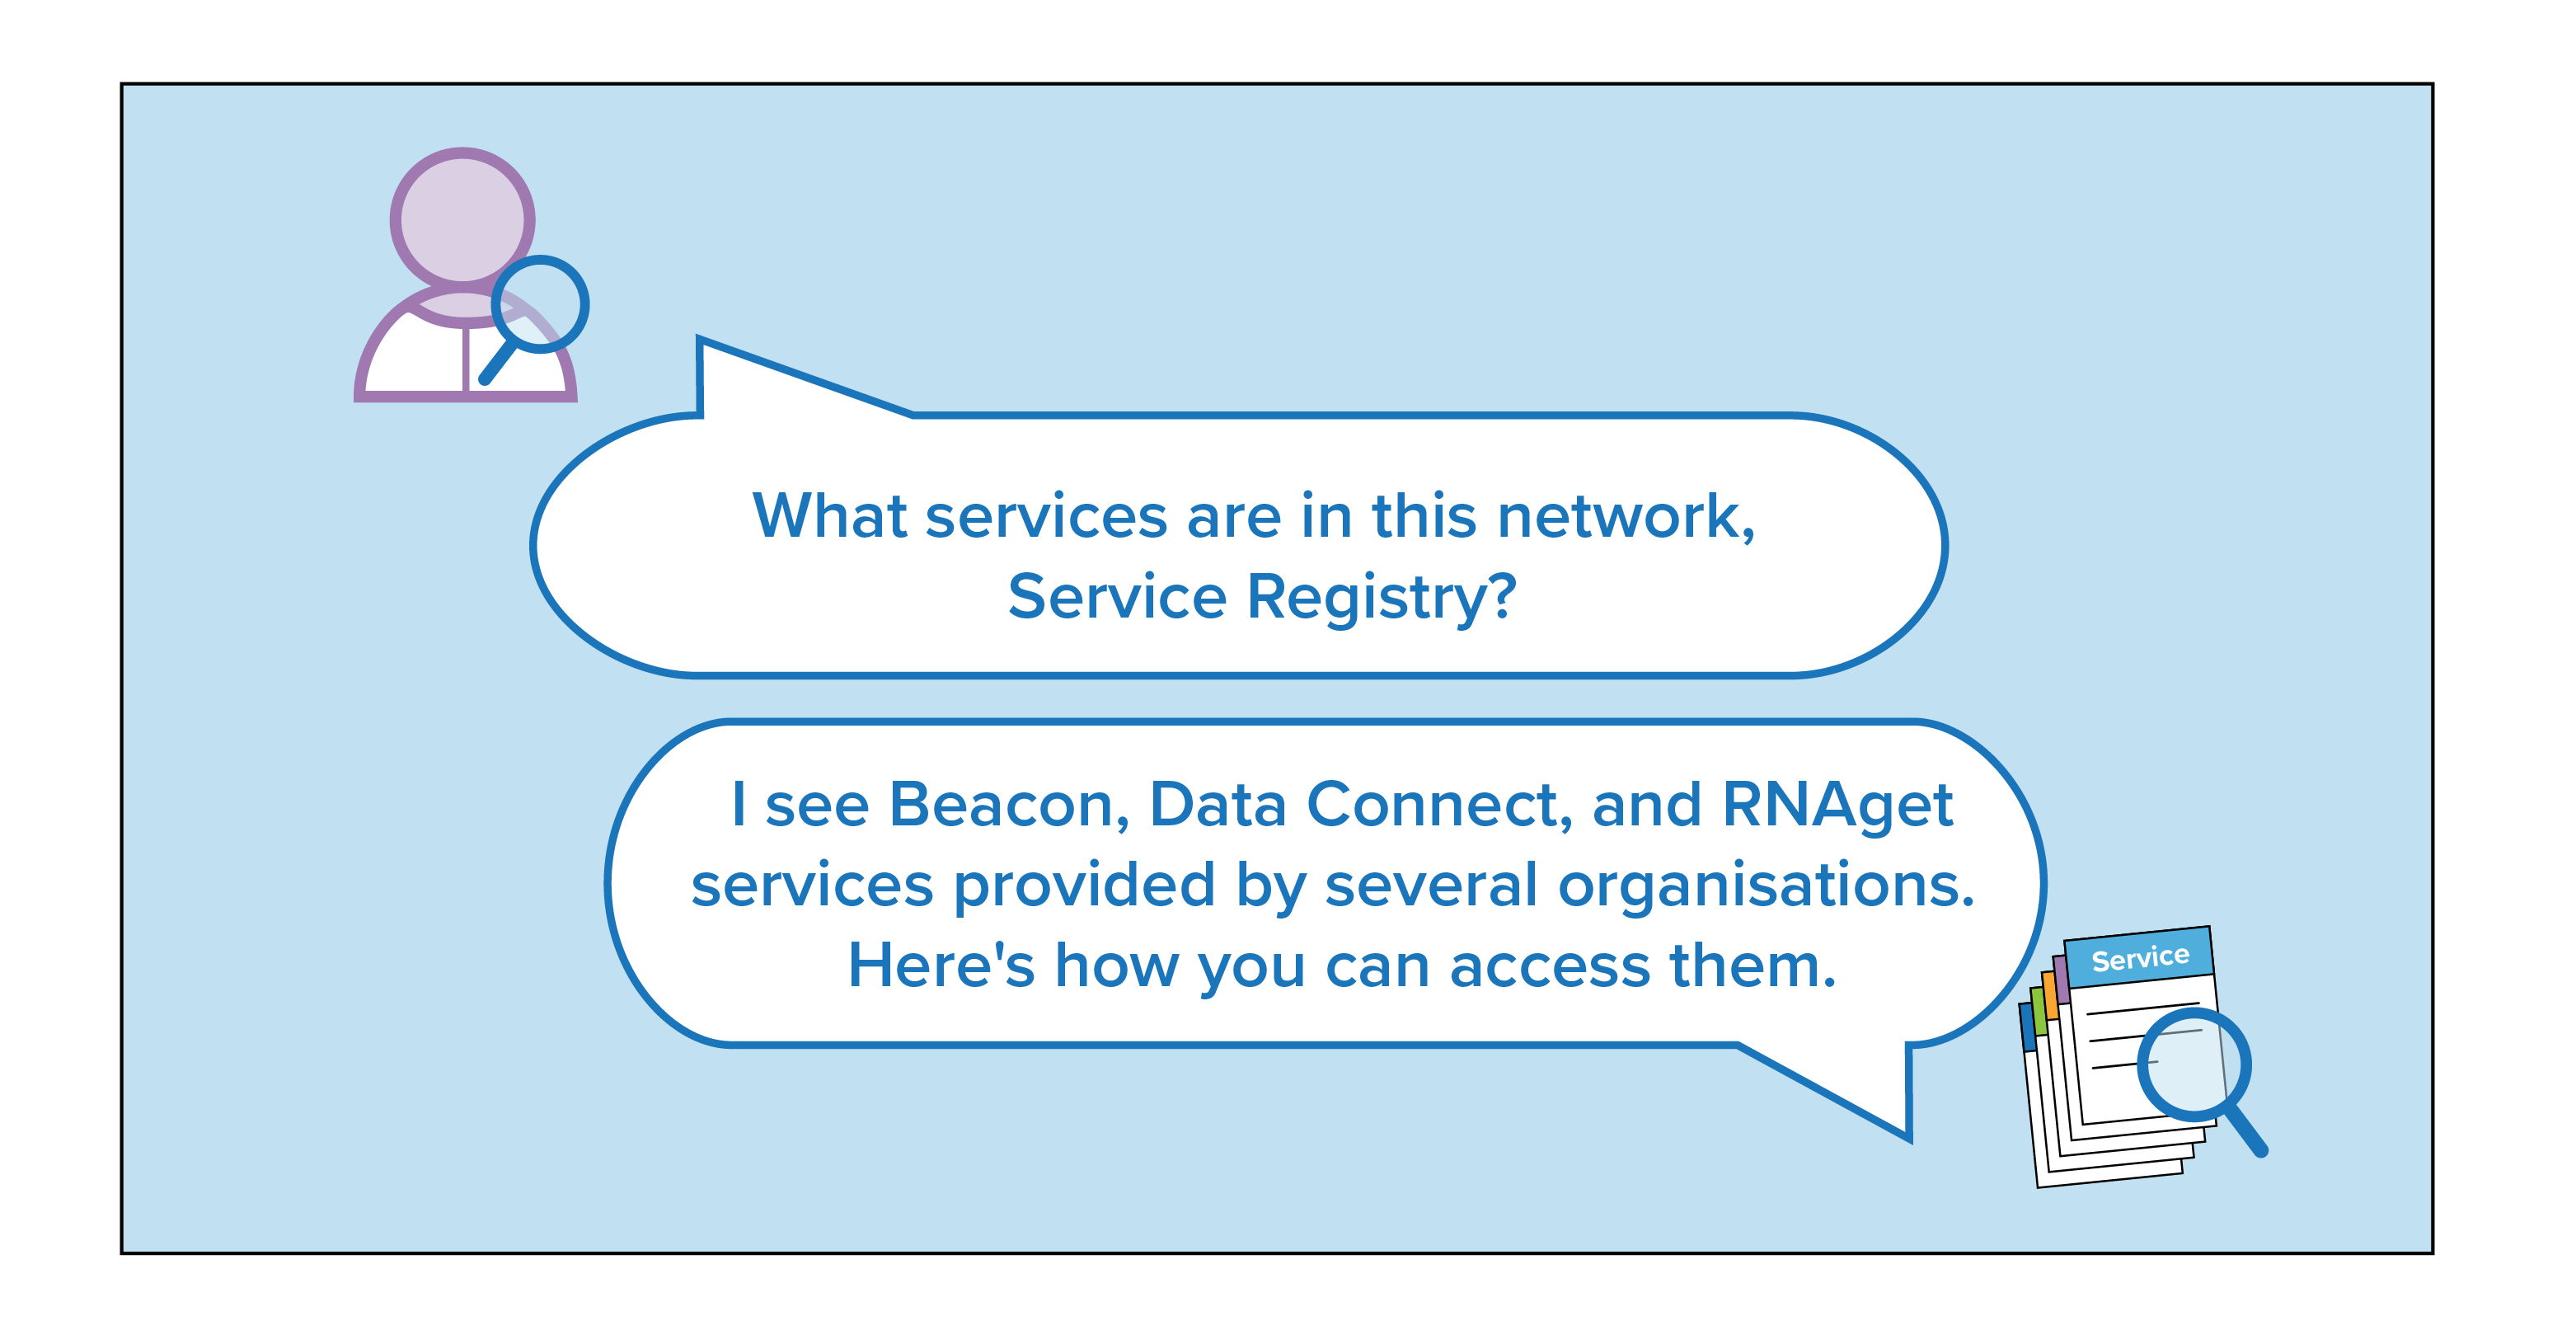 A short dialogue exchange between a researcher and Service Registry, where the researcher asks what services are housed within the Service Registry, and the Service Registry replies back with its services and how to access them.